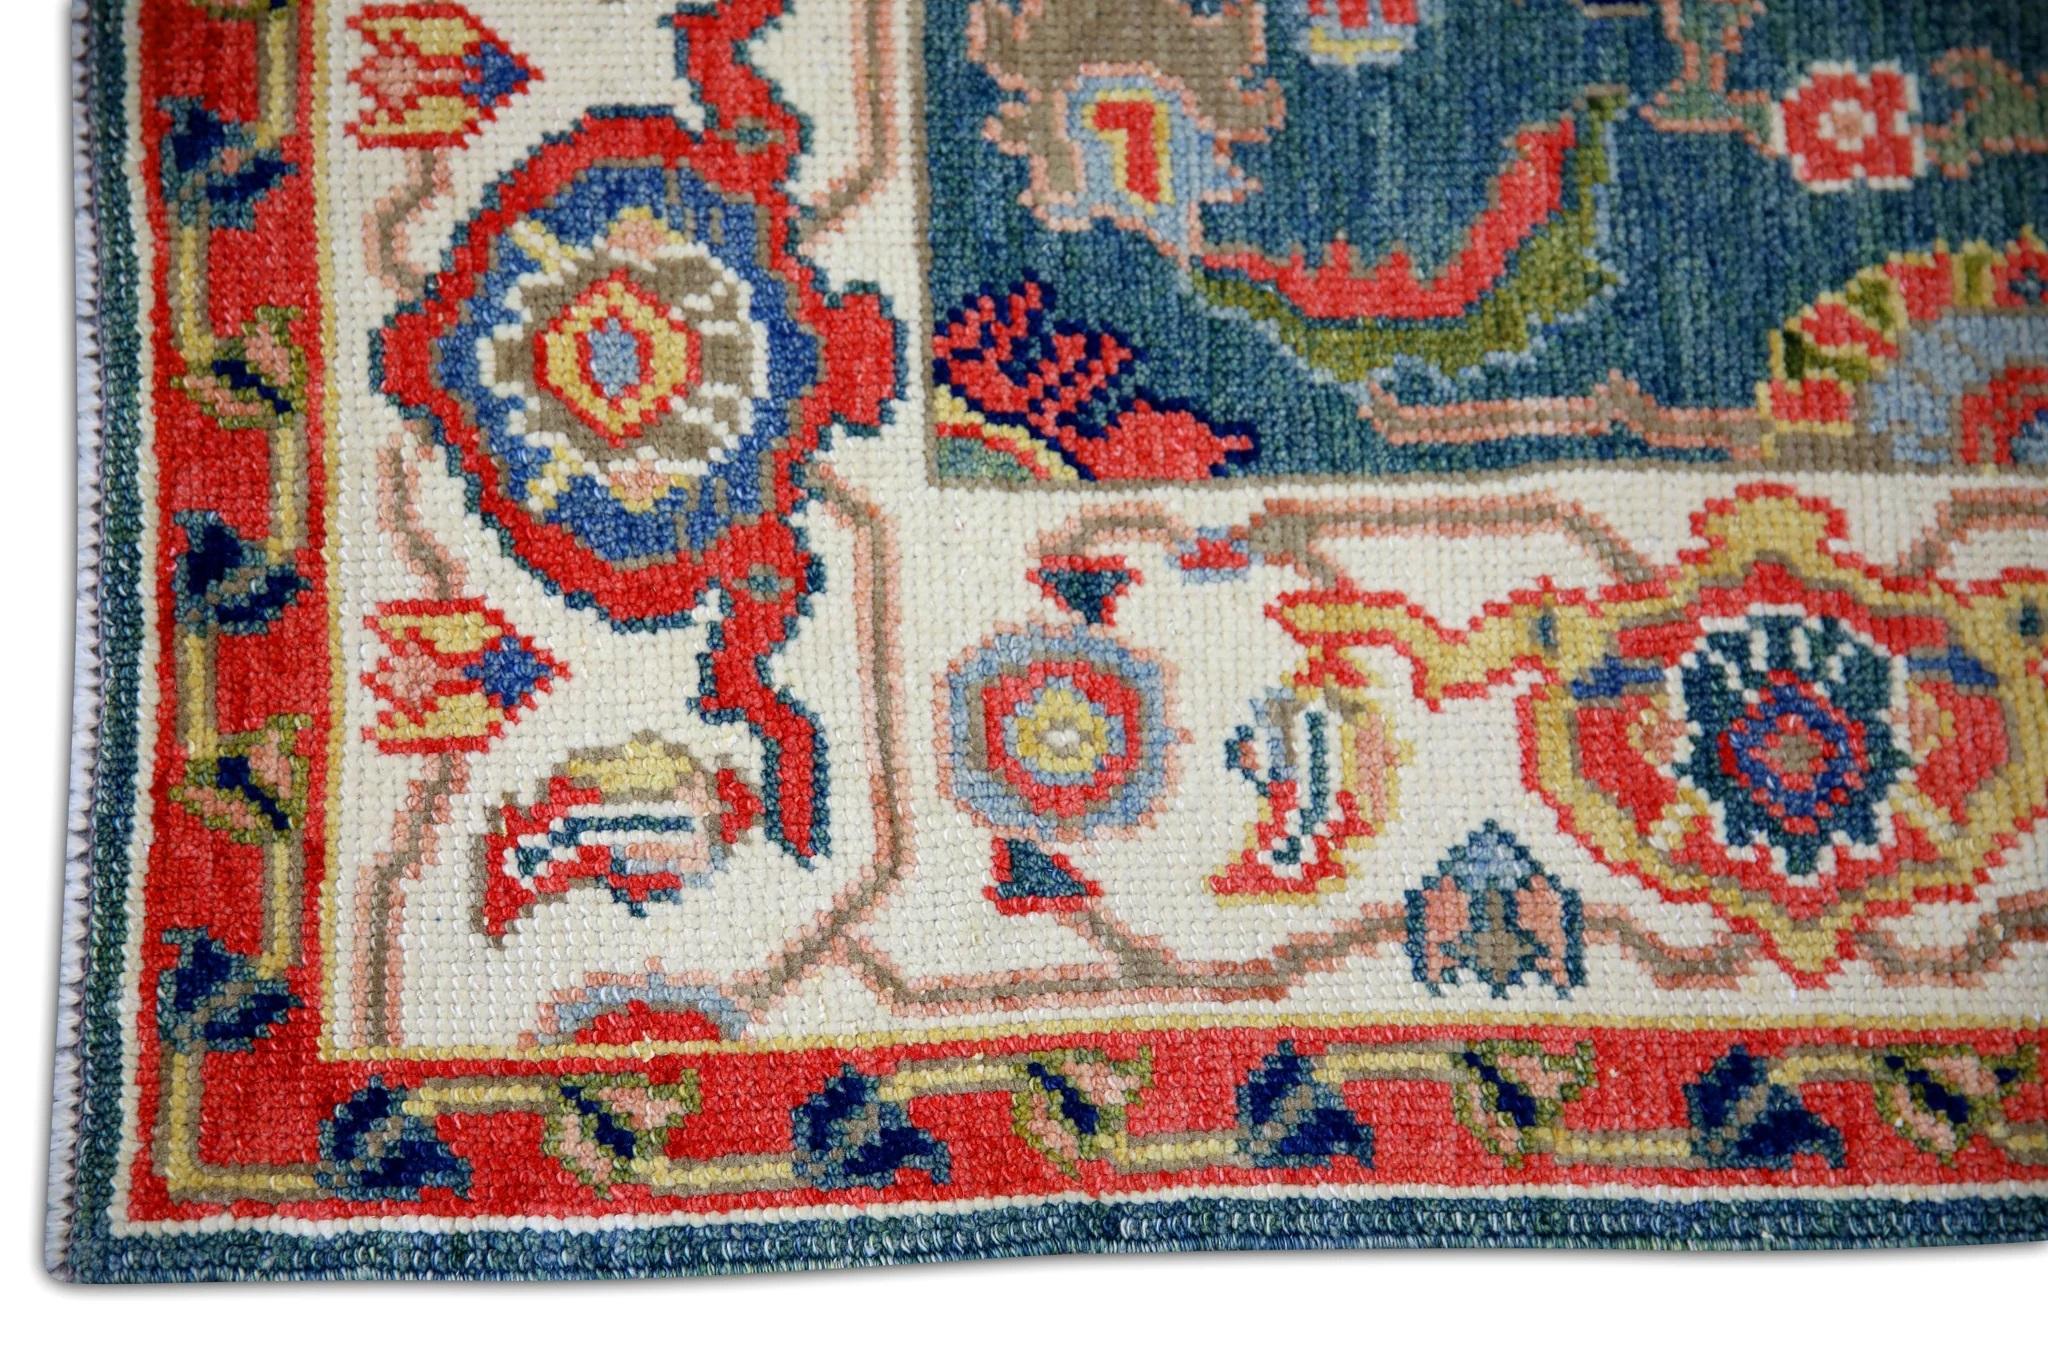 Vegetable Dyed Cream, Green, and Red Floral Turkish Finewoven Wool Oushak Rug 2'7